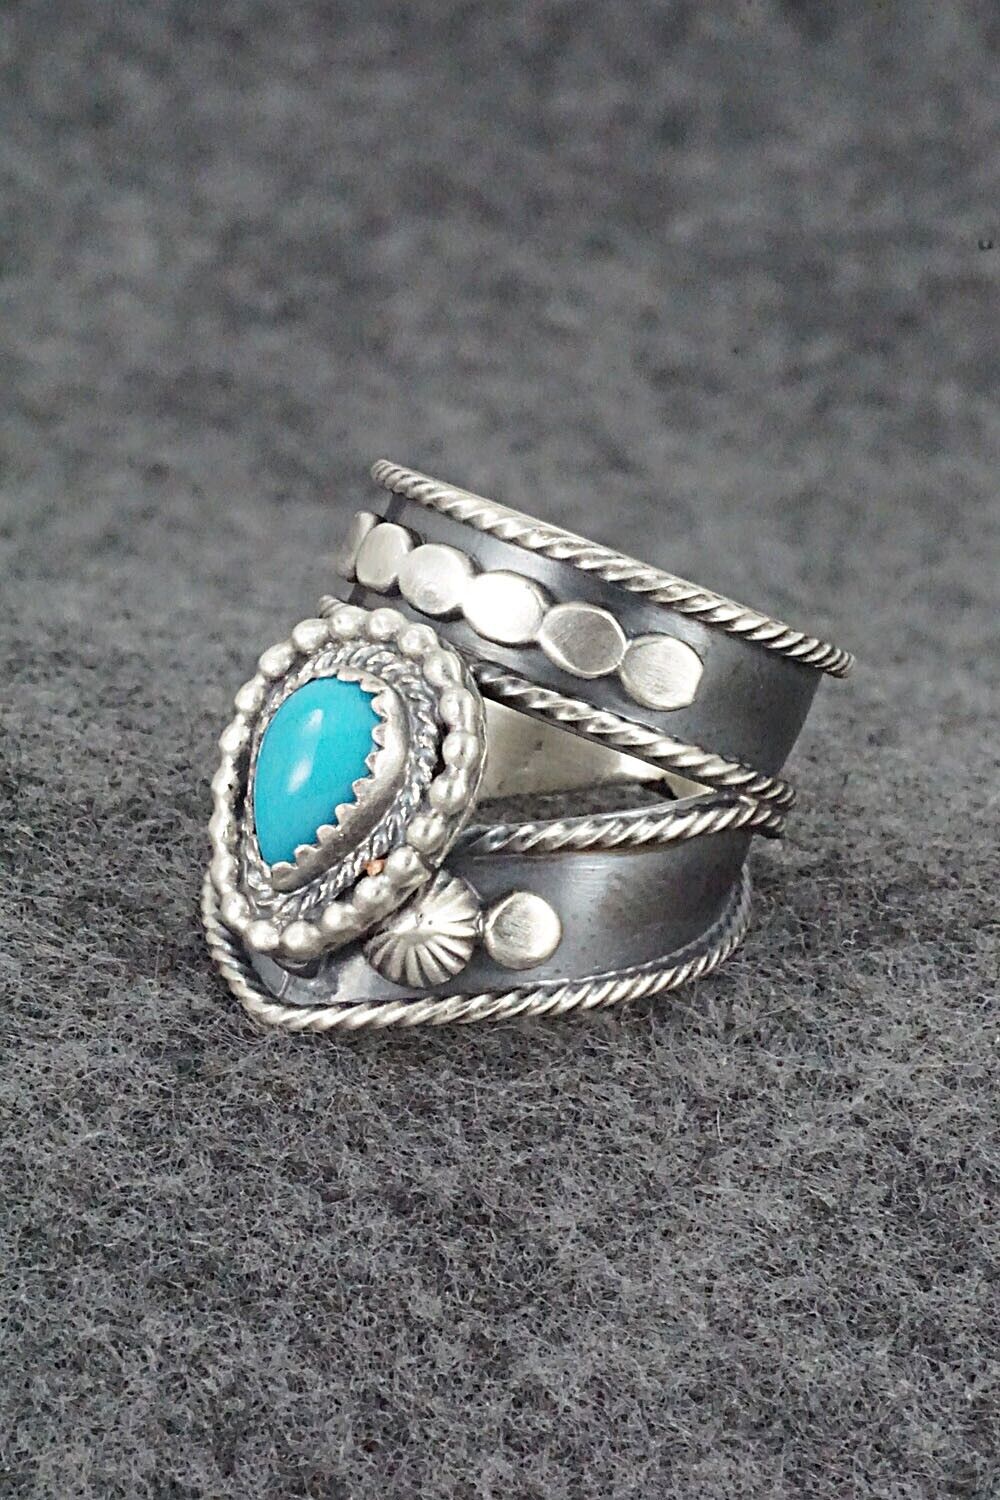 Turquoise & Sterling Silver Ring - Tom Lewis - Size 8